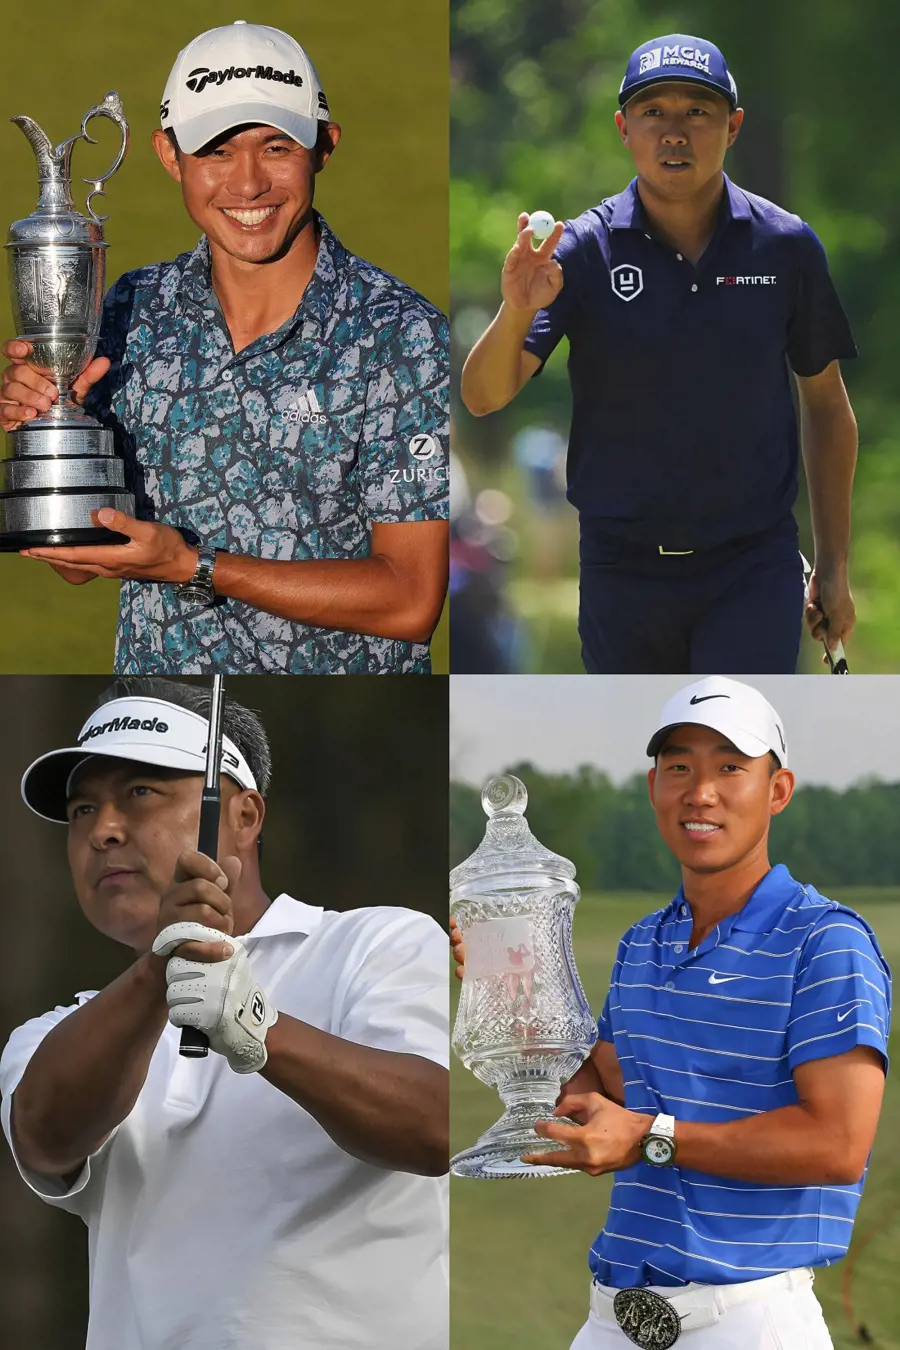 A group of PGA golfers from Los Angeles have represented the city on the PGA Tour. 